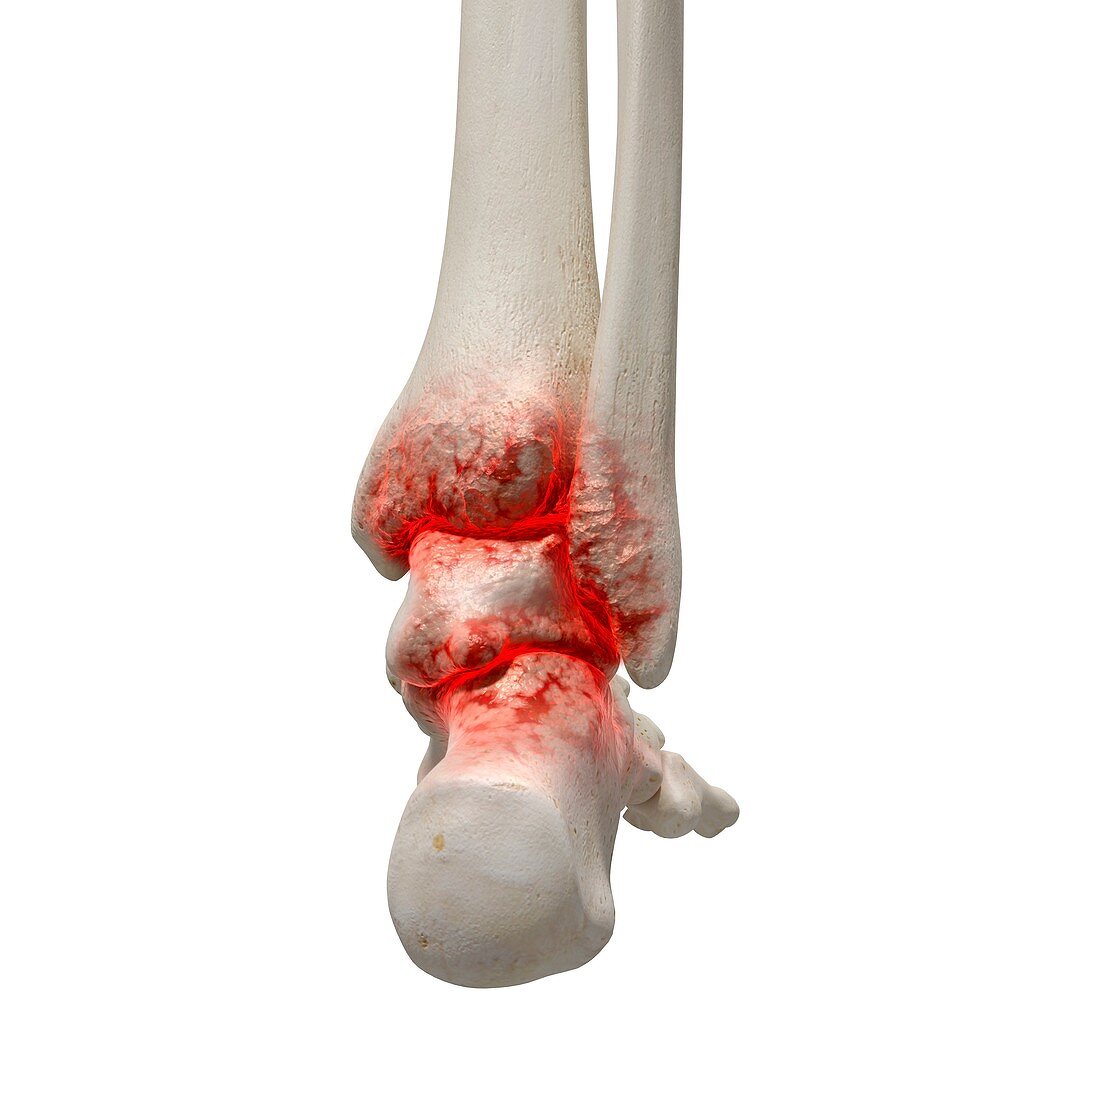 Arthritis in the ankle, illustration